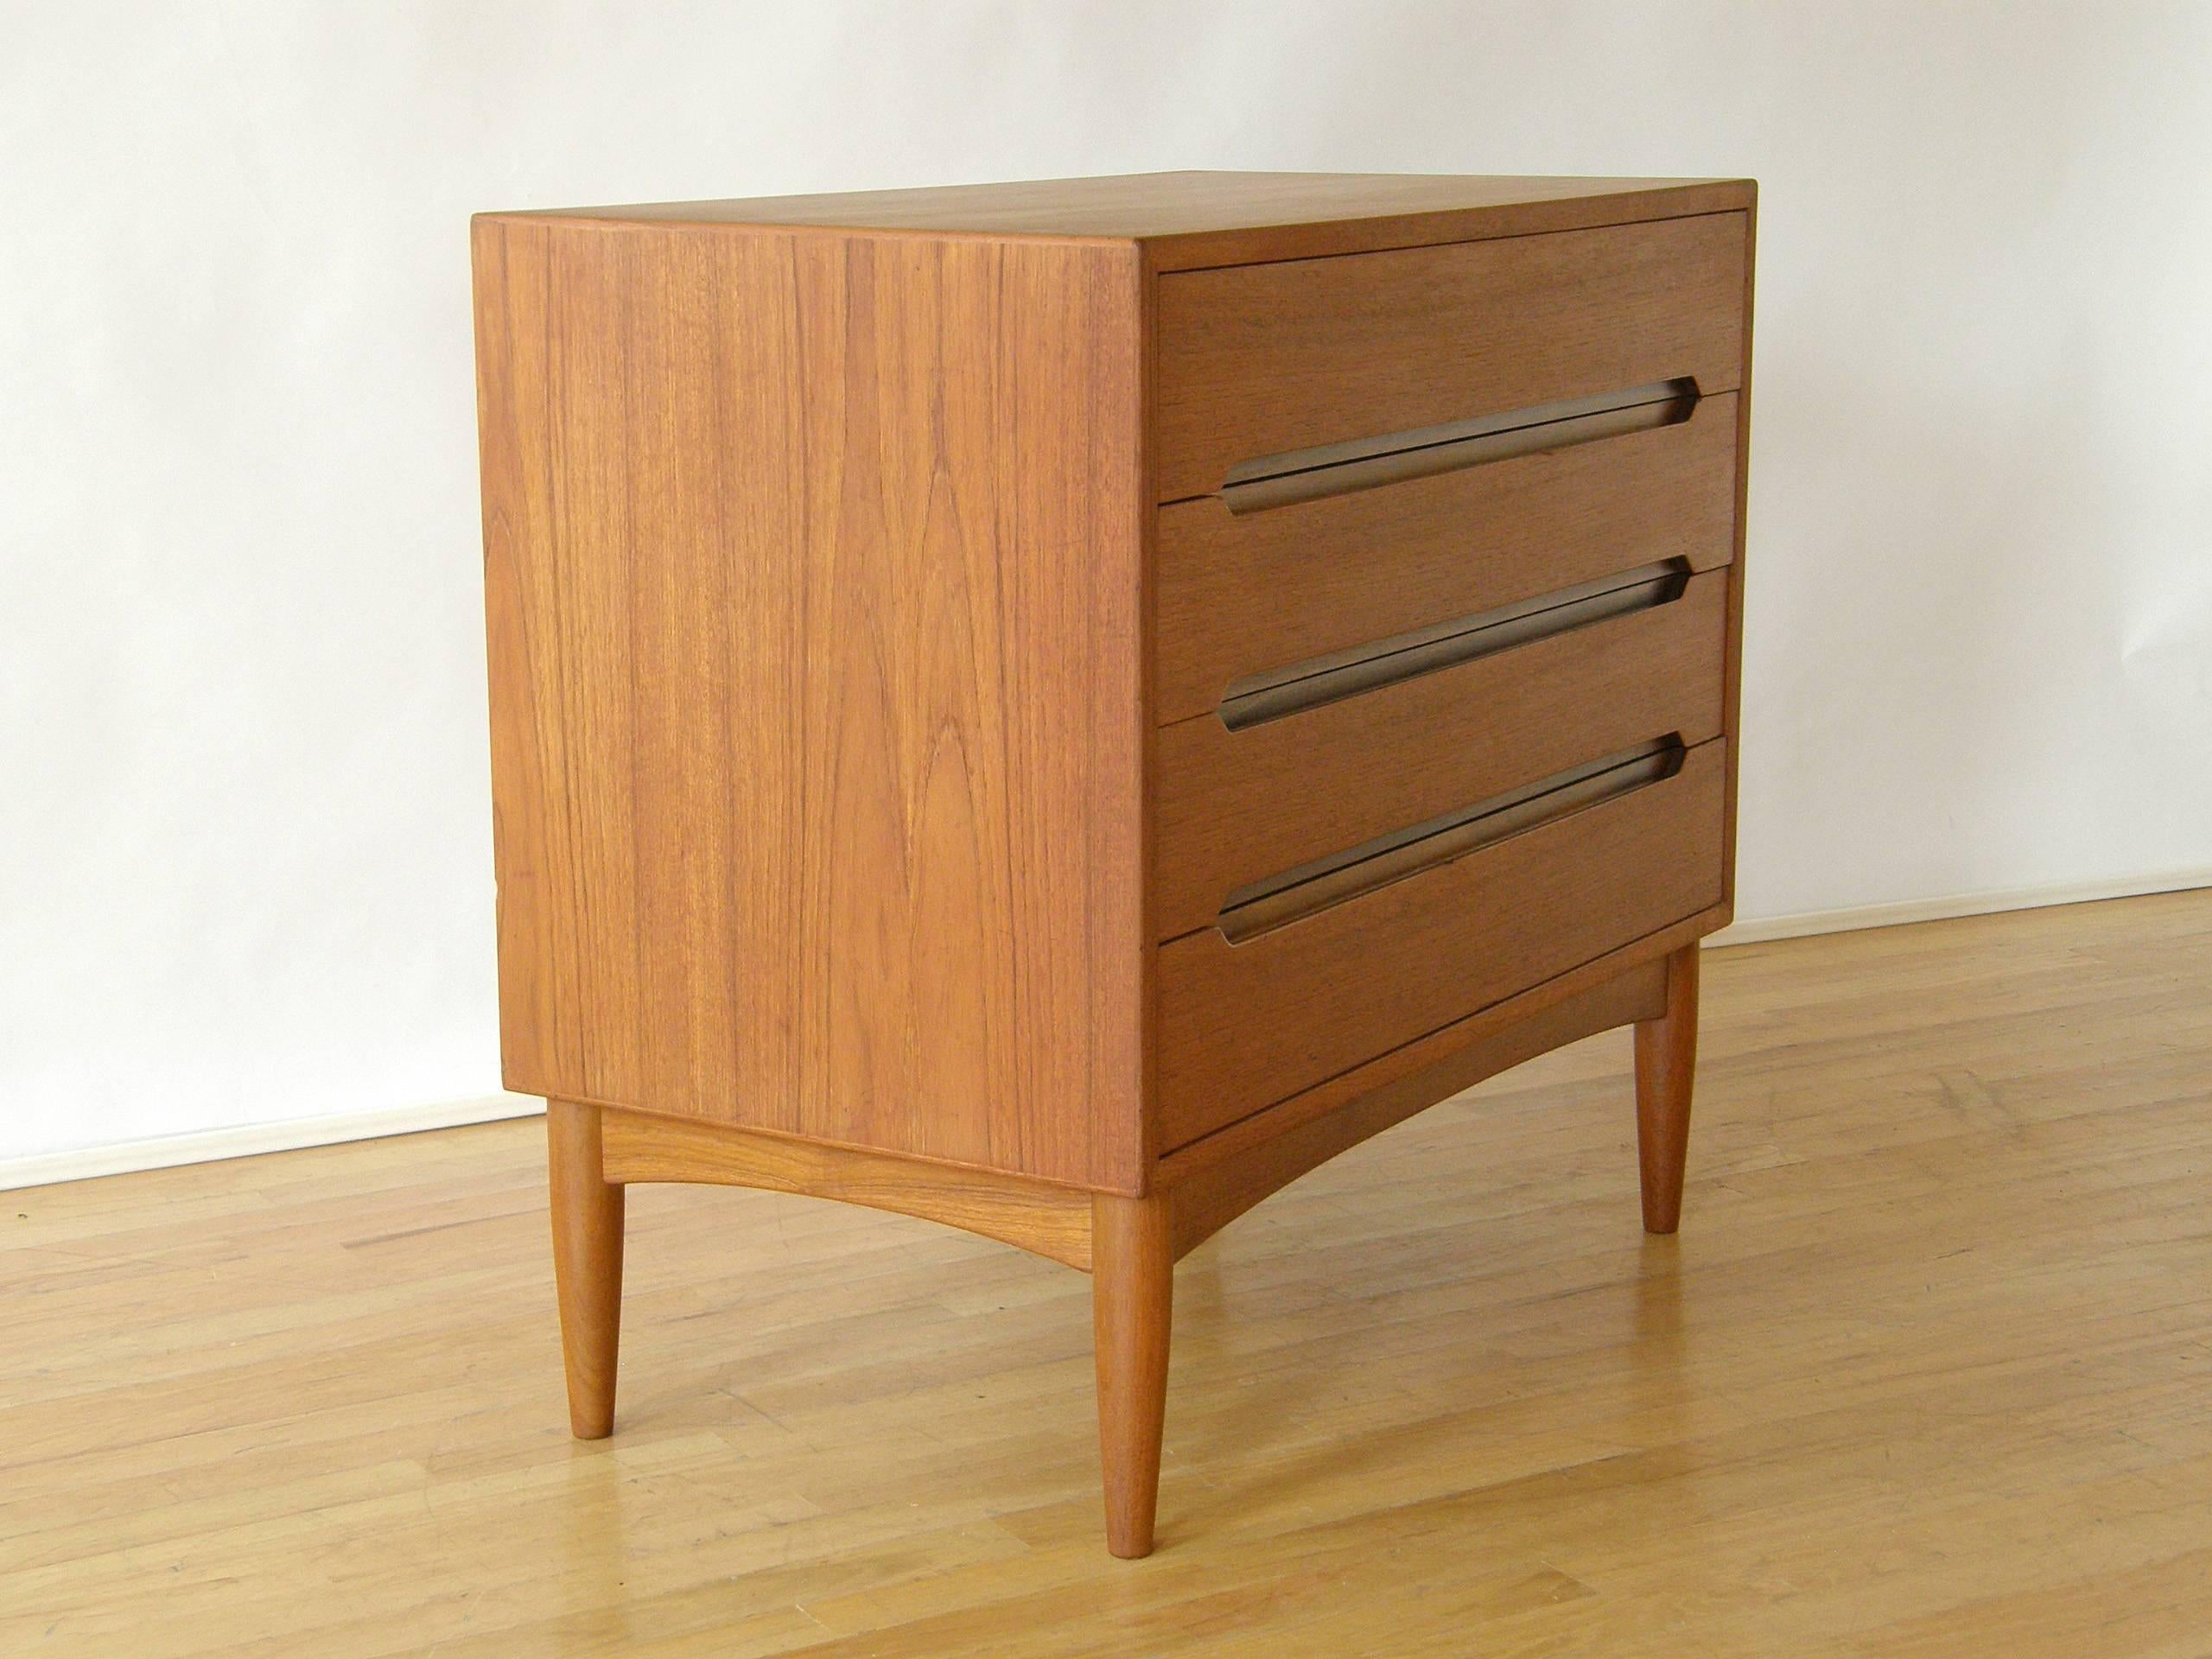 Teak, four drawer dresser with recessed pulls designed by Arne Wahl Iversen for Vinde Møbelfabrik, Denmark.

Please contact us if you have any questions.